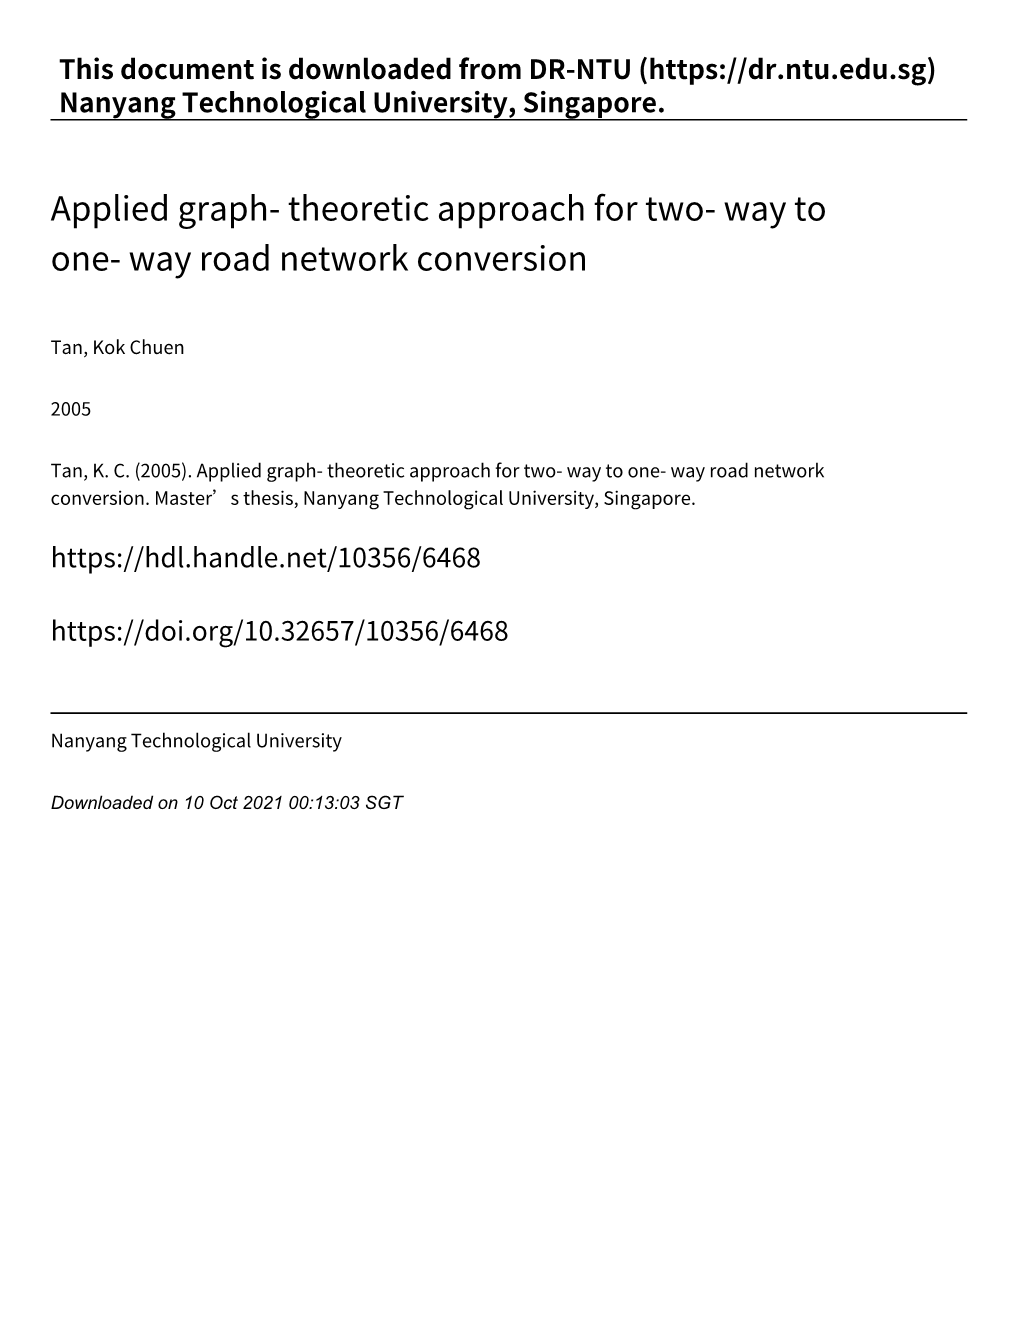 Applied Graph‑ Theoretic Approach for Two‑ Way to One‑ Way Road Network Conversion